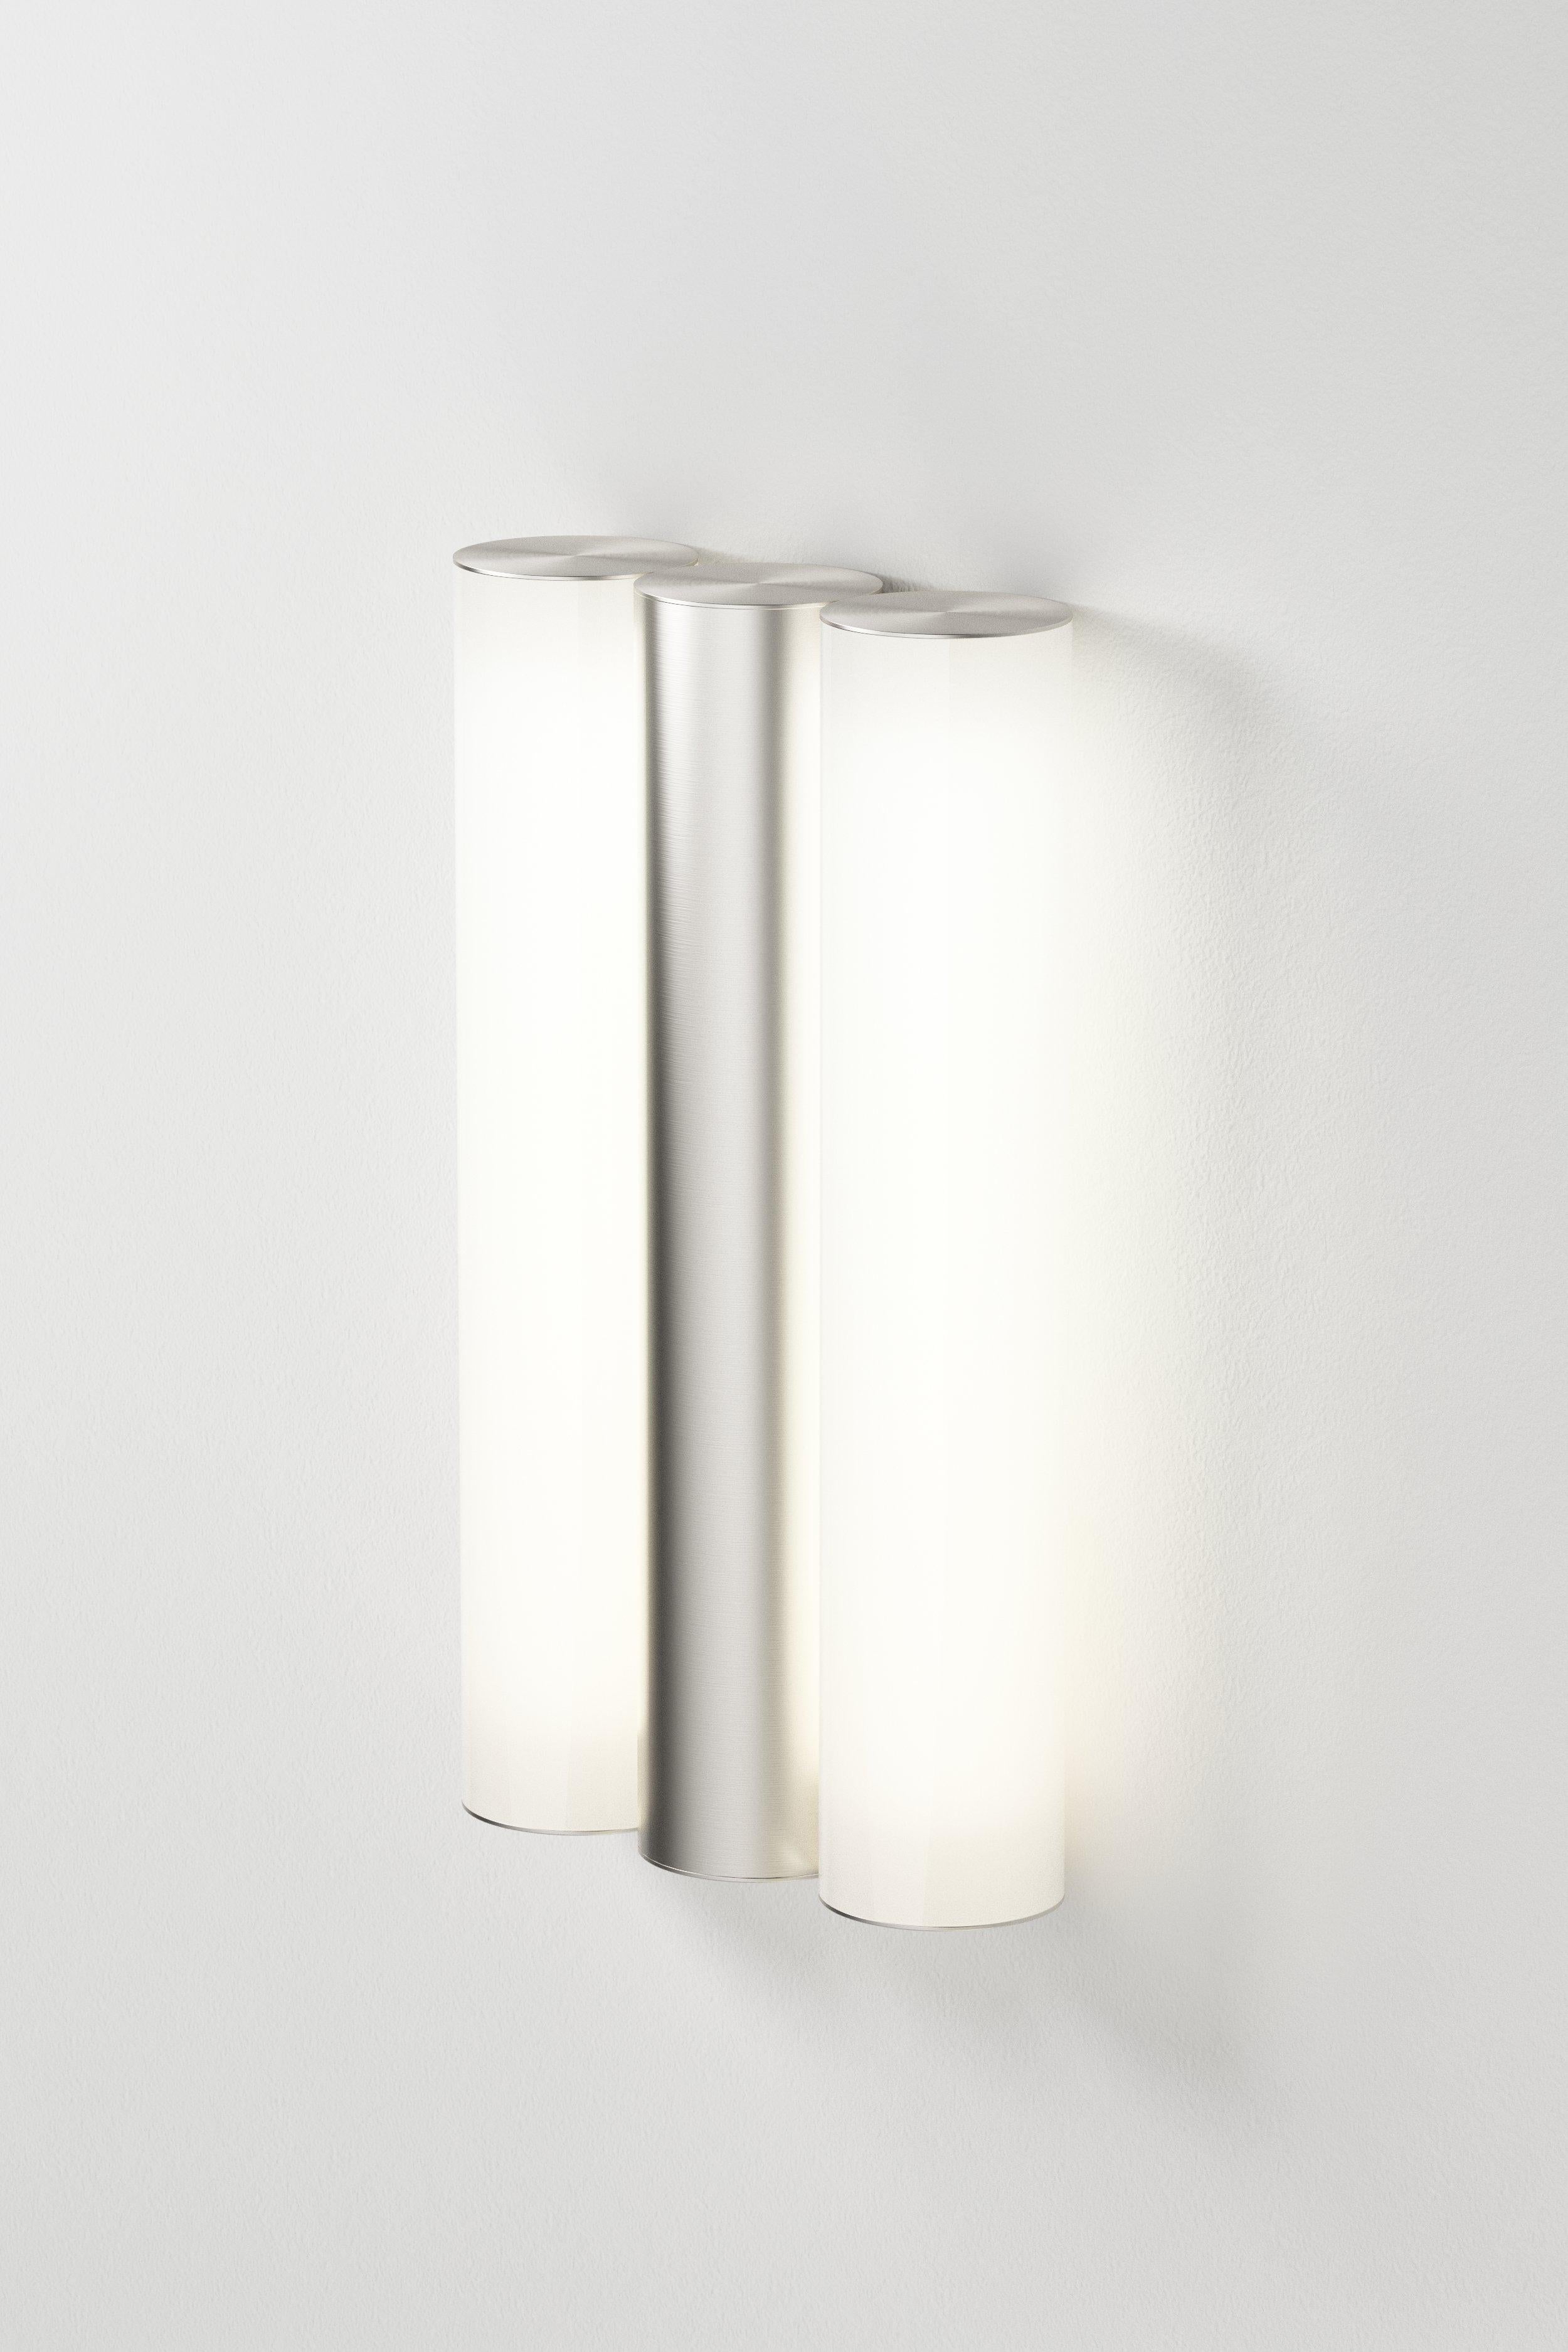 IP Gamma satin nickel wall light by Sylvain Willenz
Dimensions: D15.2 x W5 X H28.4 cm
Materials: solid brass, satin nickel
Others finishes are available.

All our lamps can be wired according to each country. If sold to the USA it will be wired